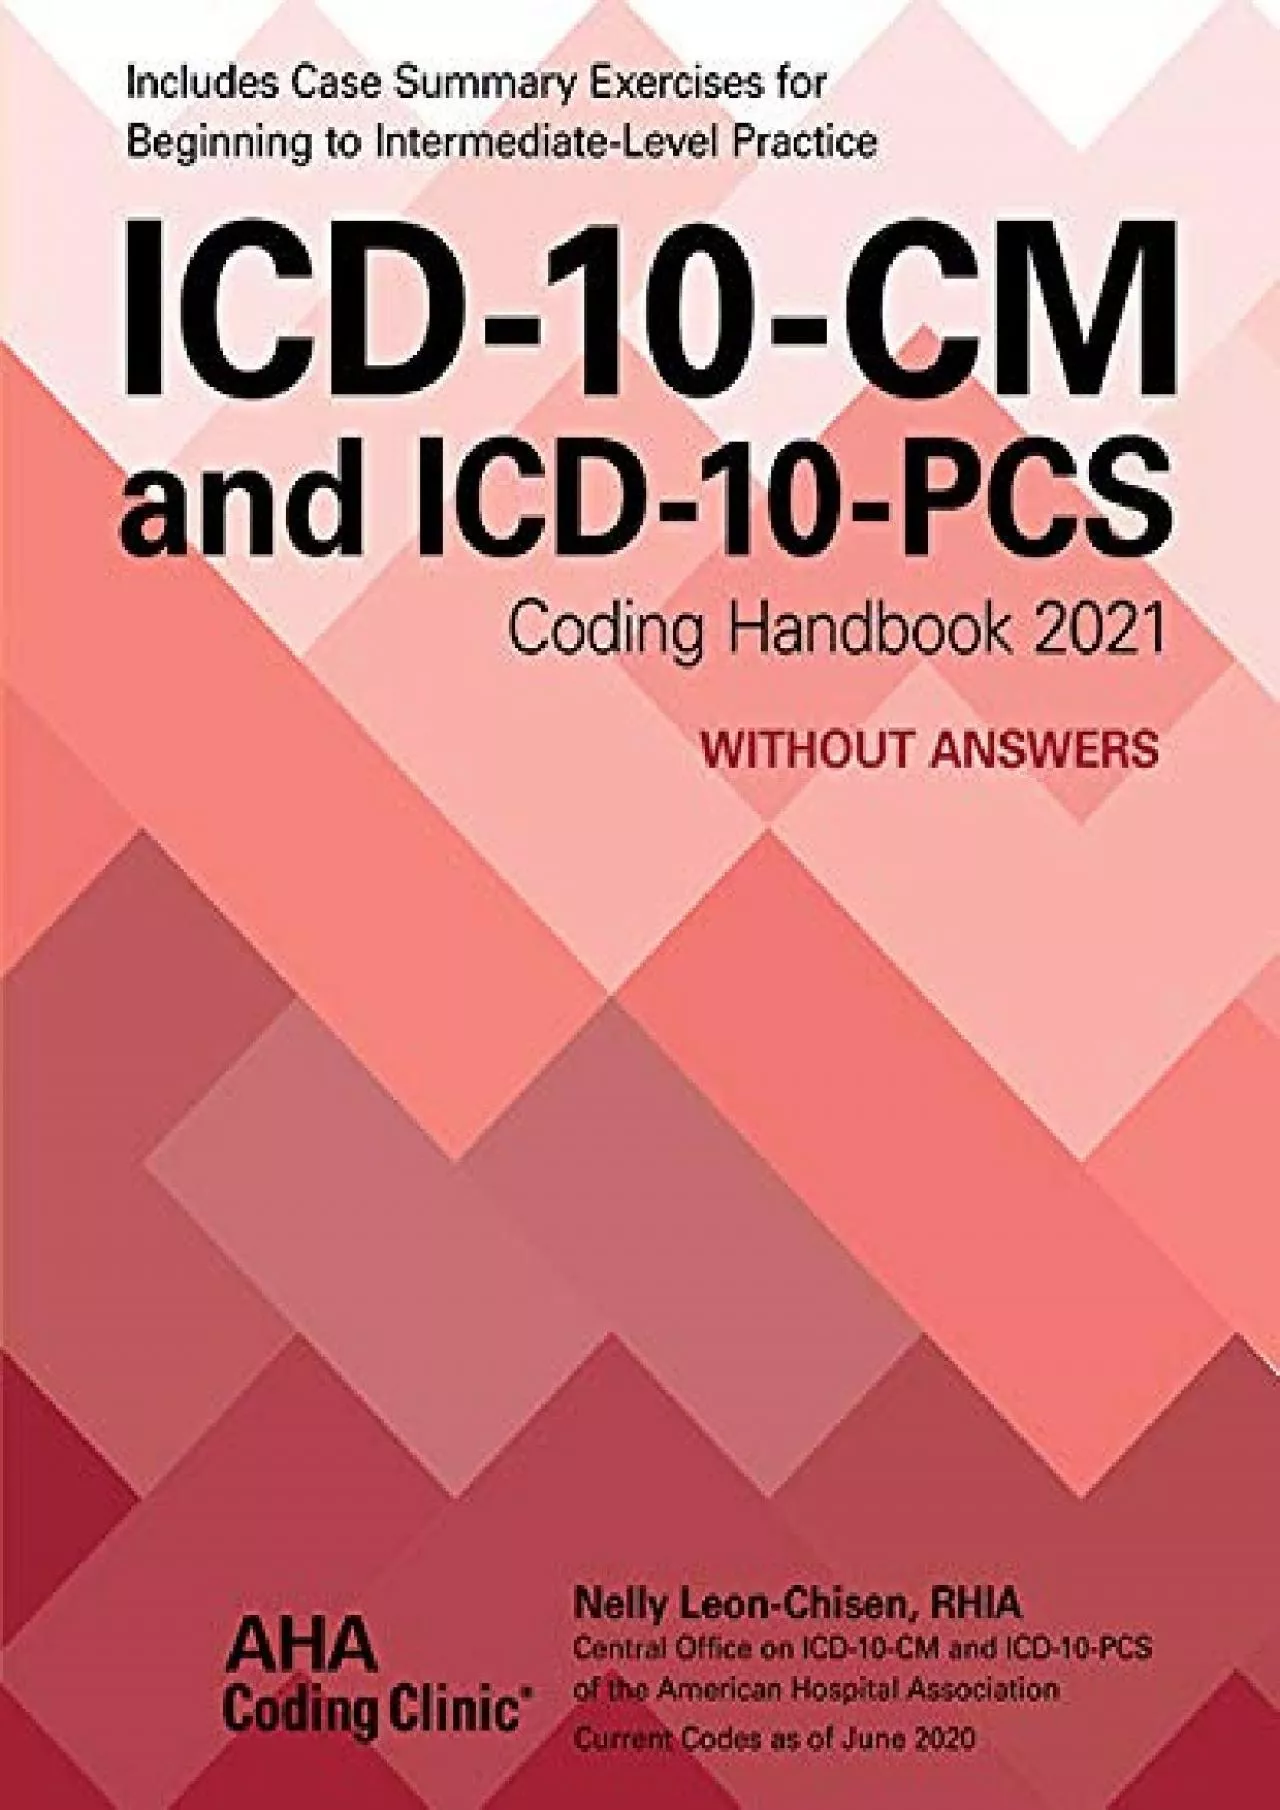 (BOOS)-ICD-10-CM and ICD-10-PCS Coding Handbook without Answers 2021